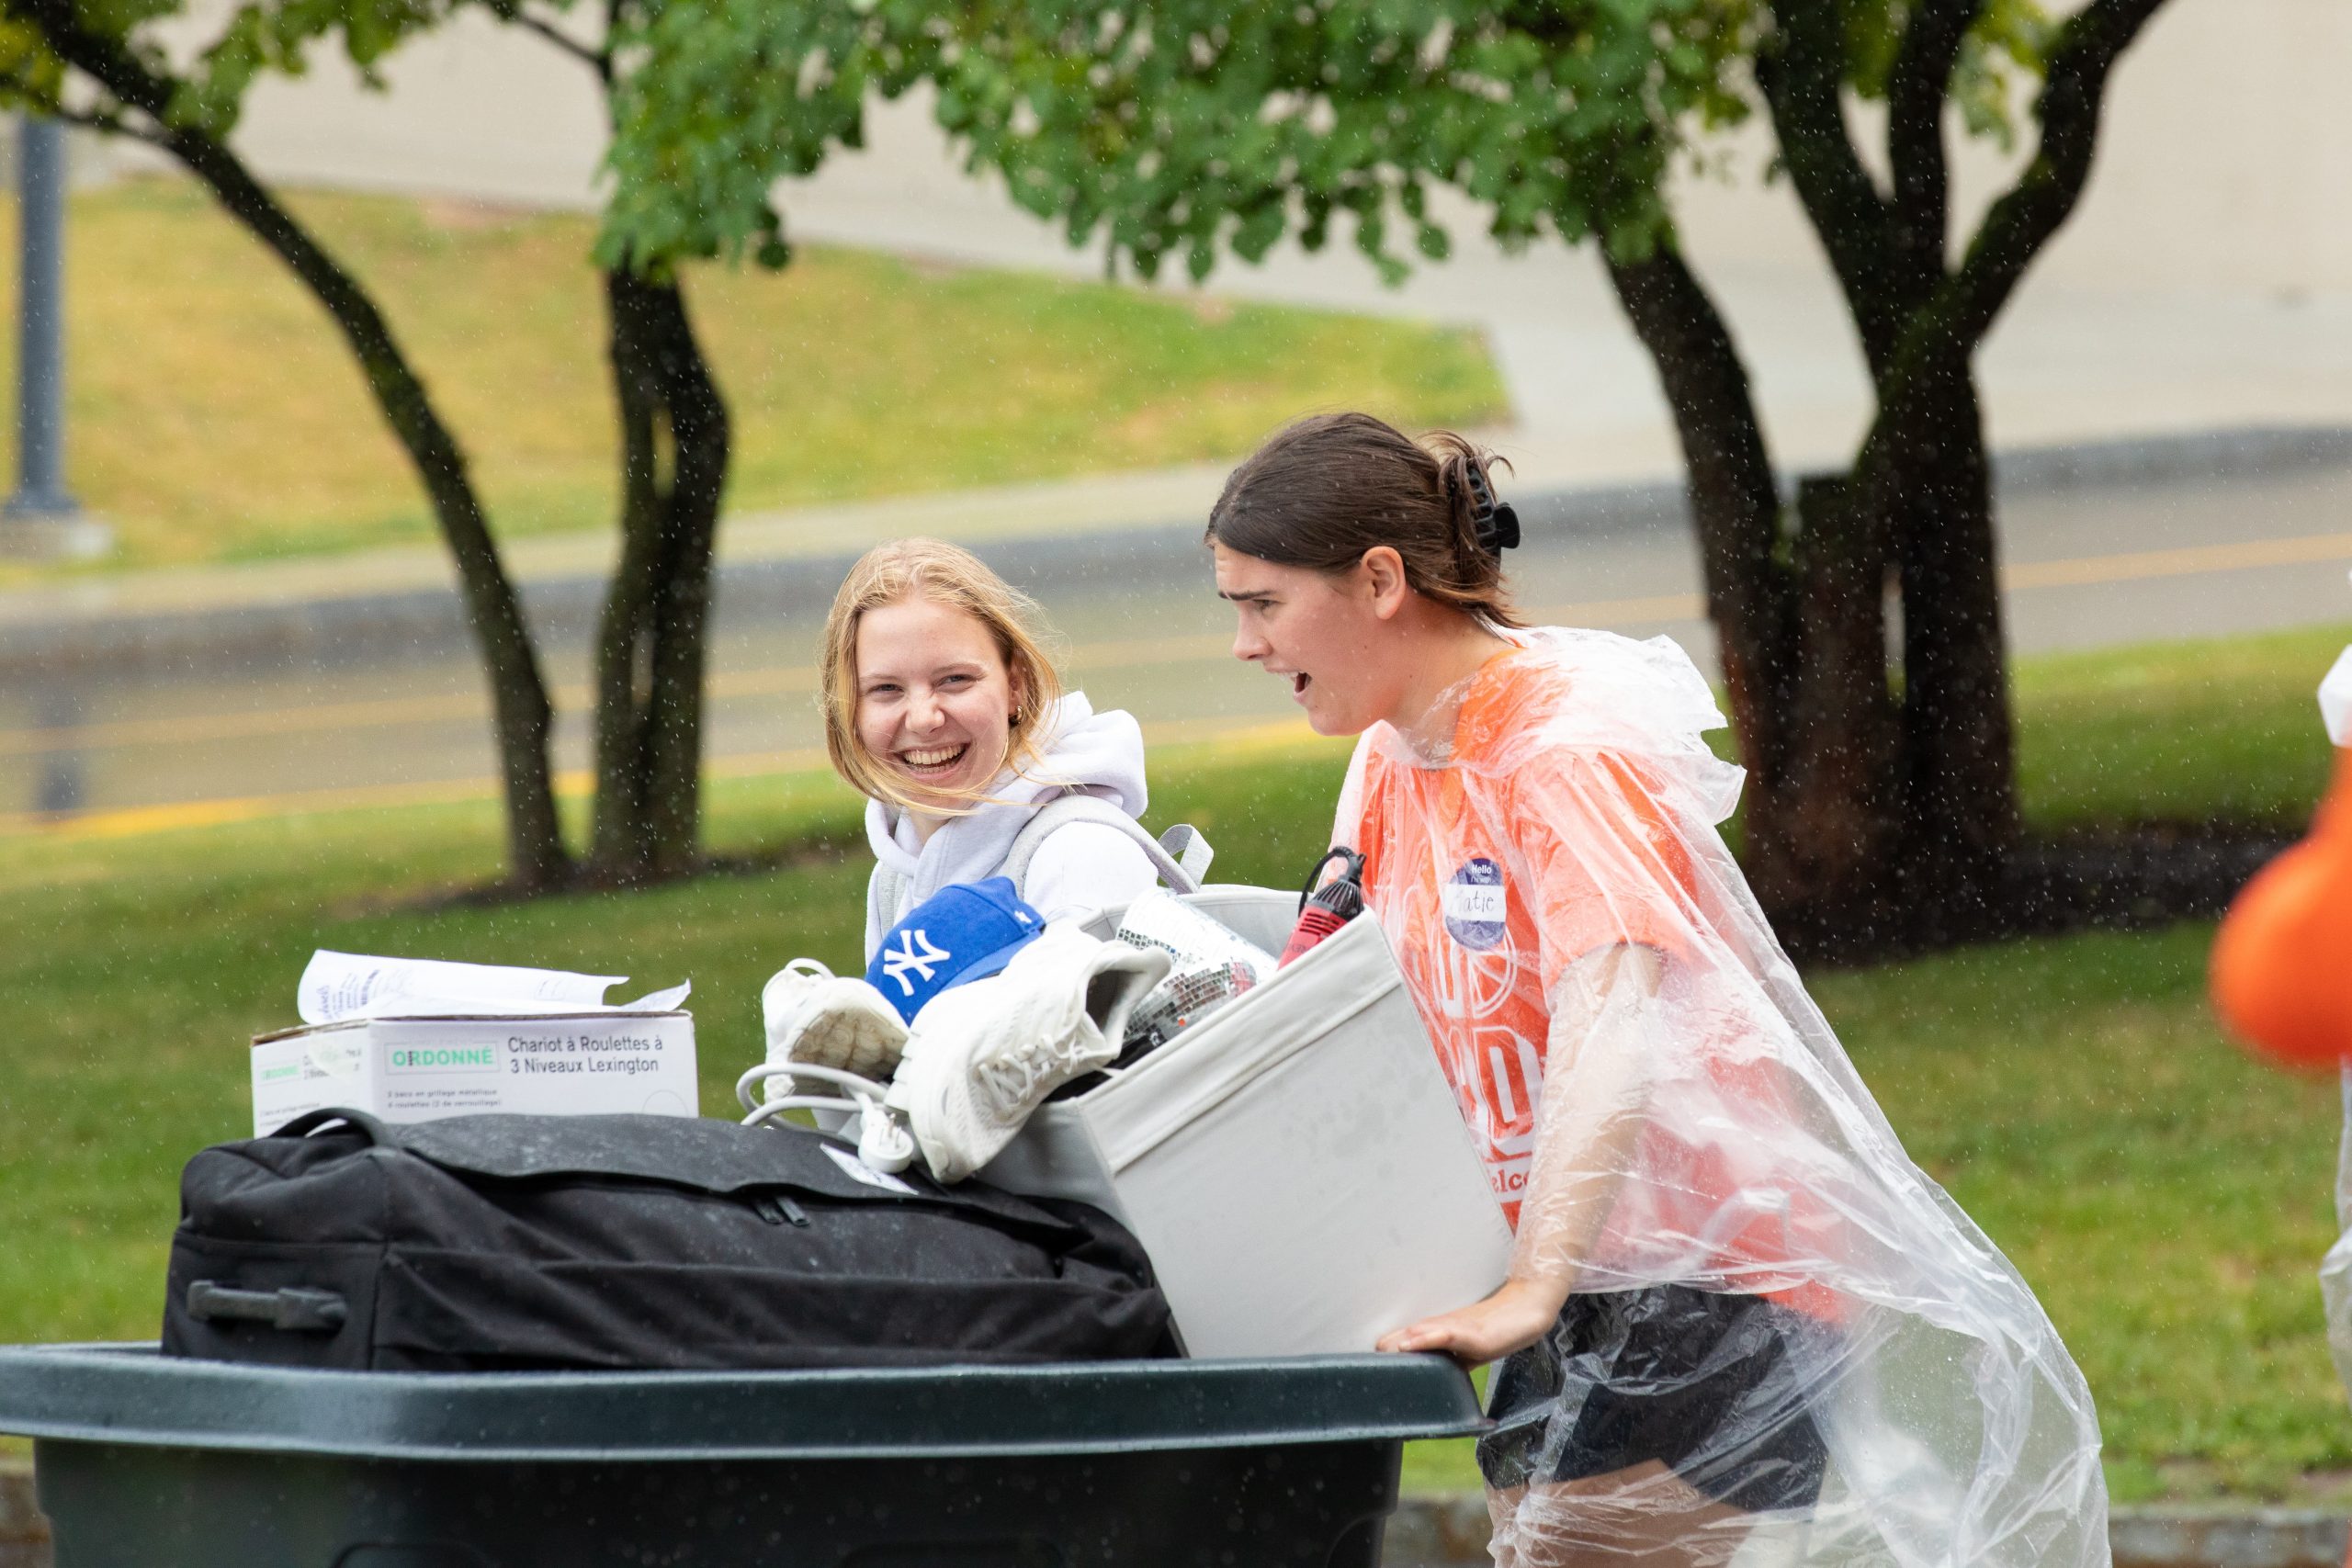 a member of the Goon Squad pushes a rolling bin alongside a new student during move-in